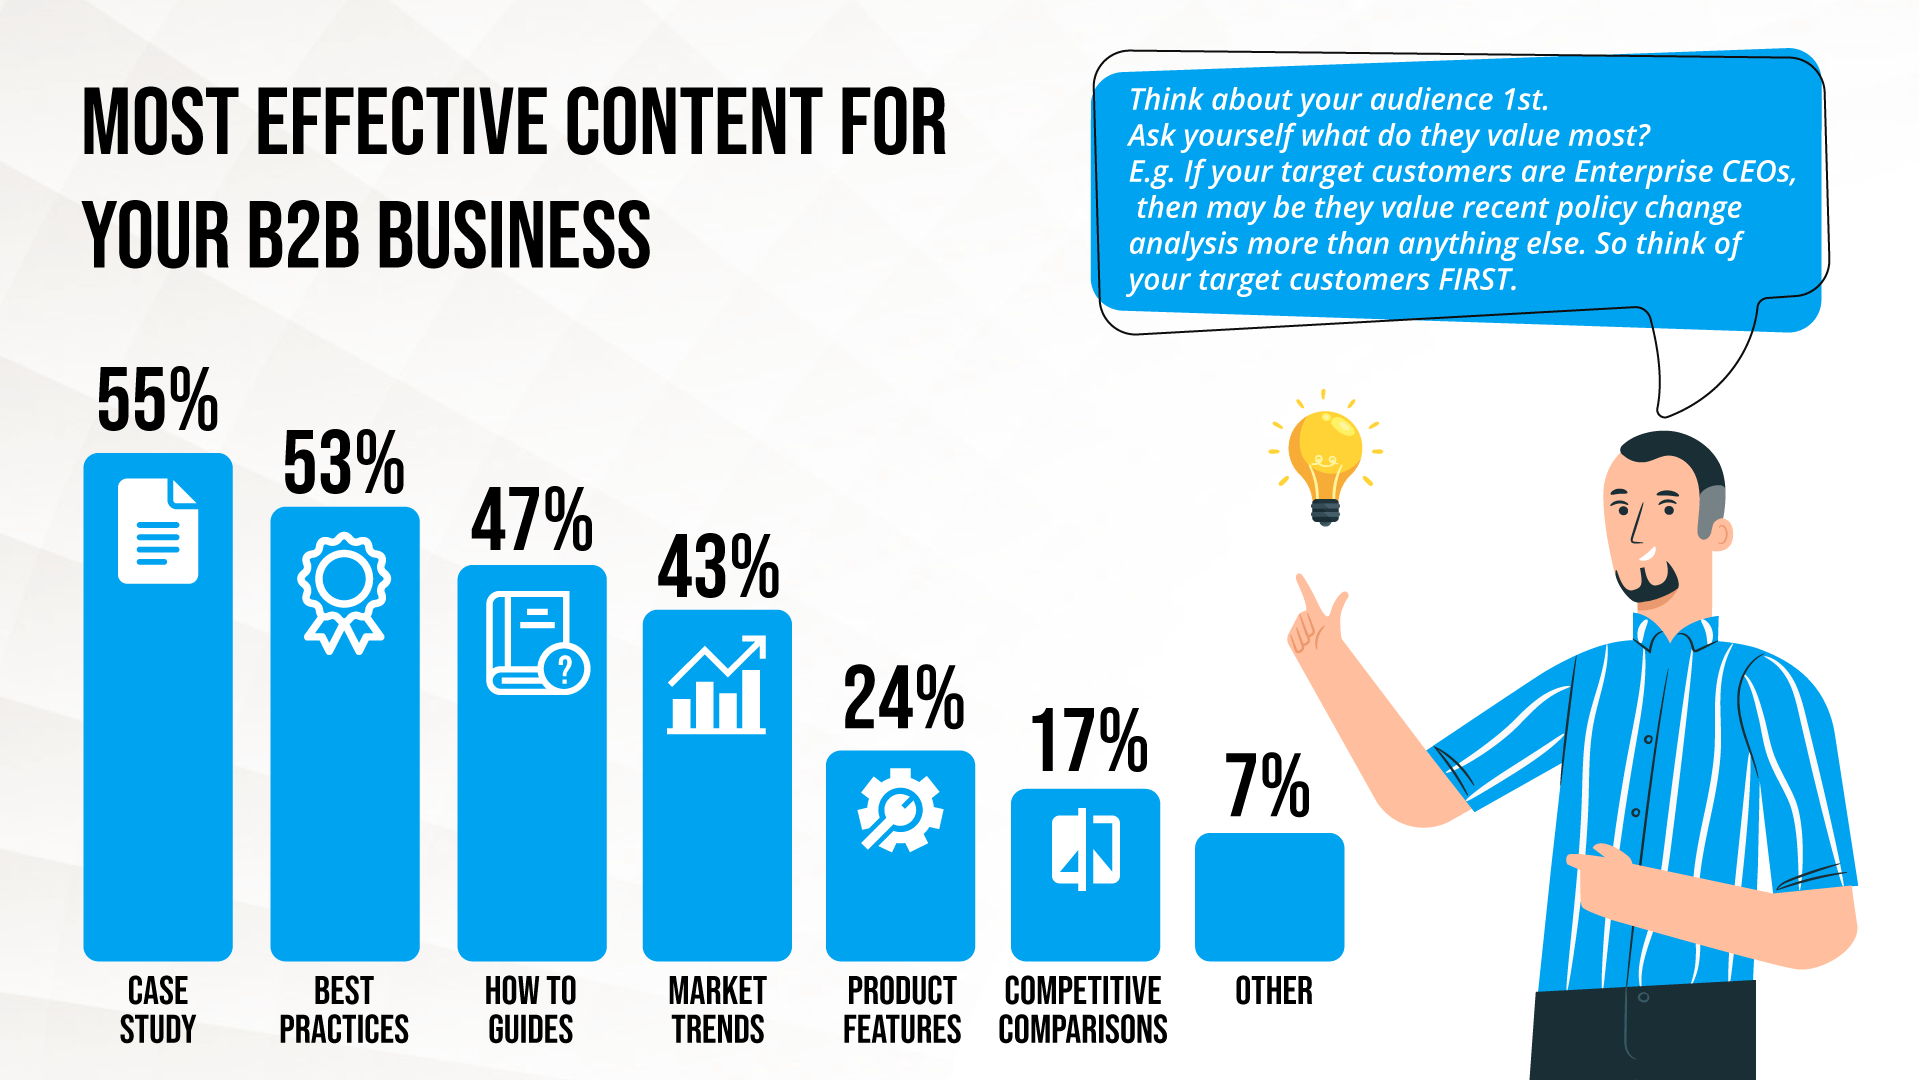 Most effective content for your b2b business